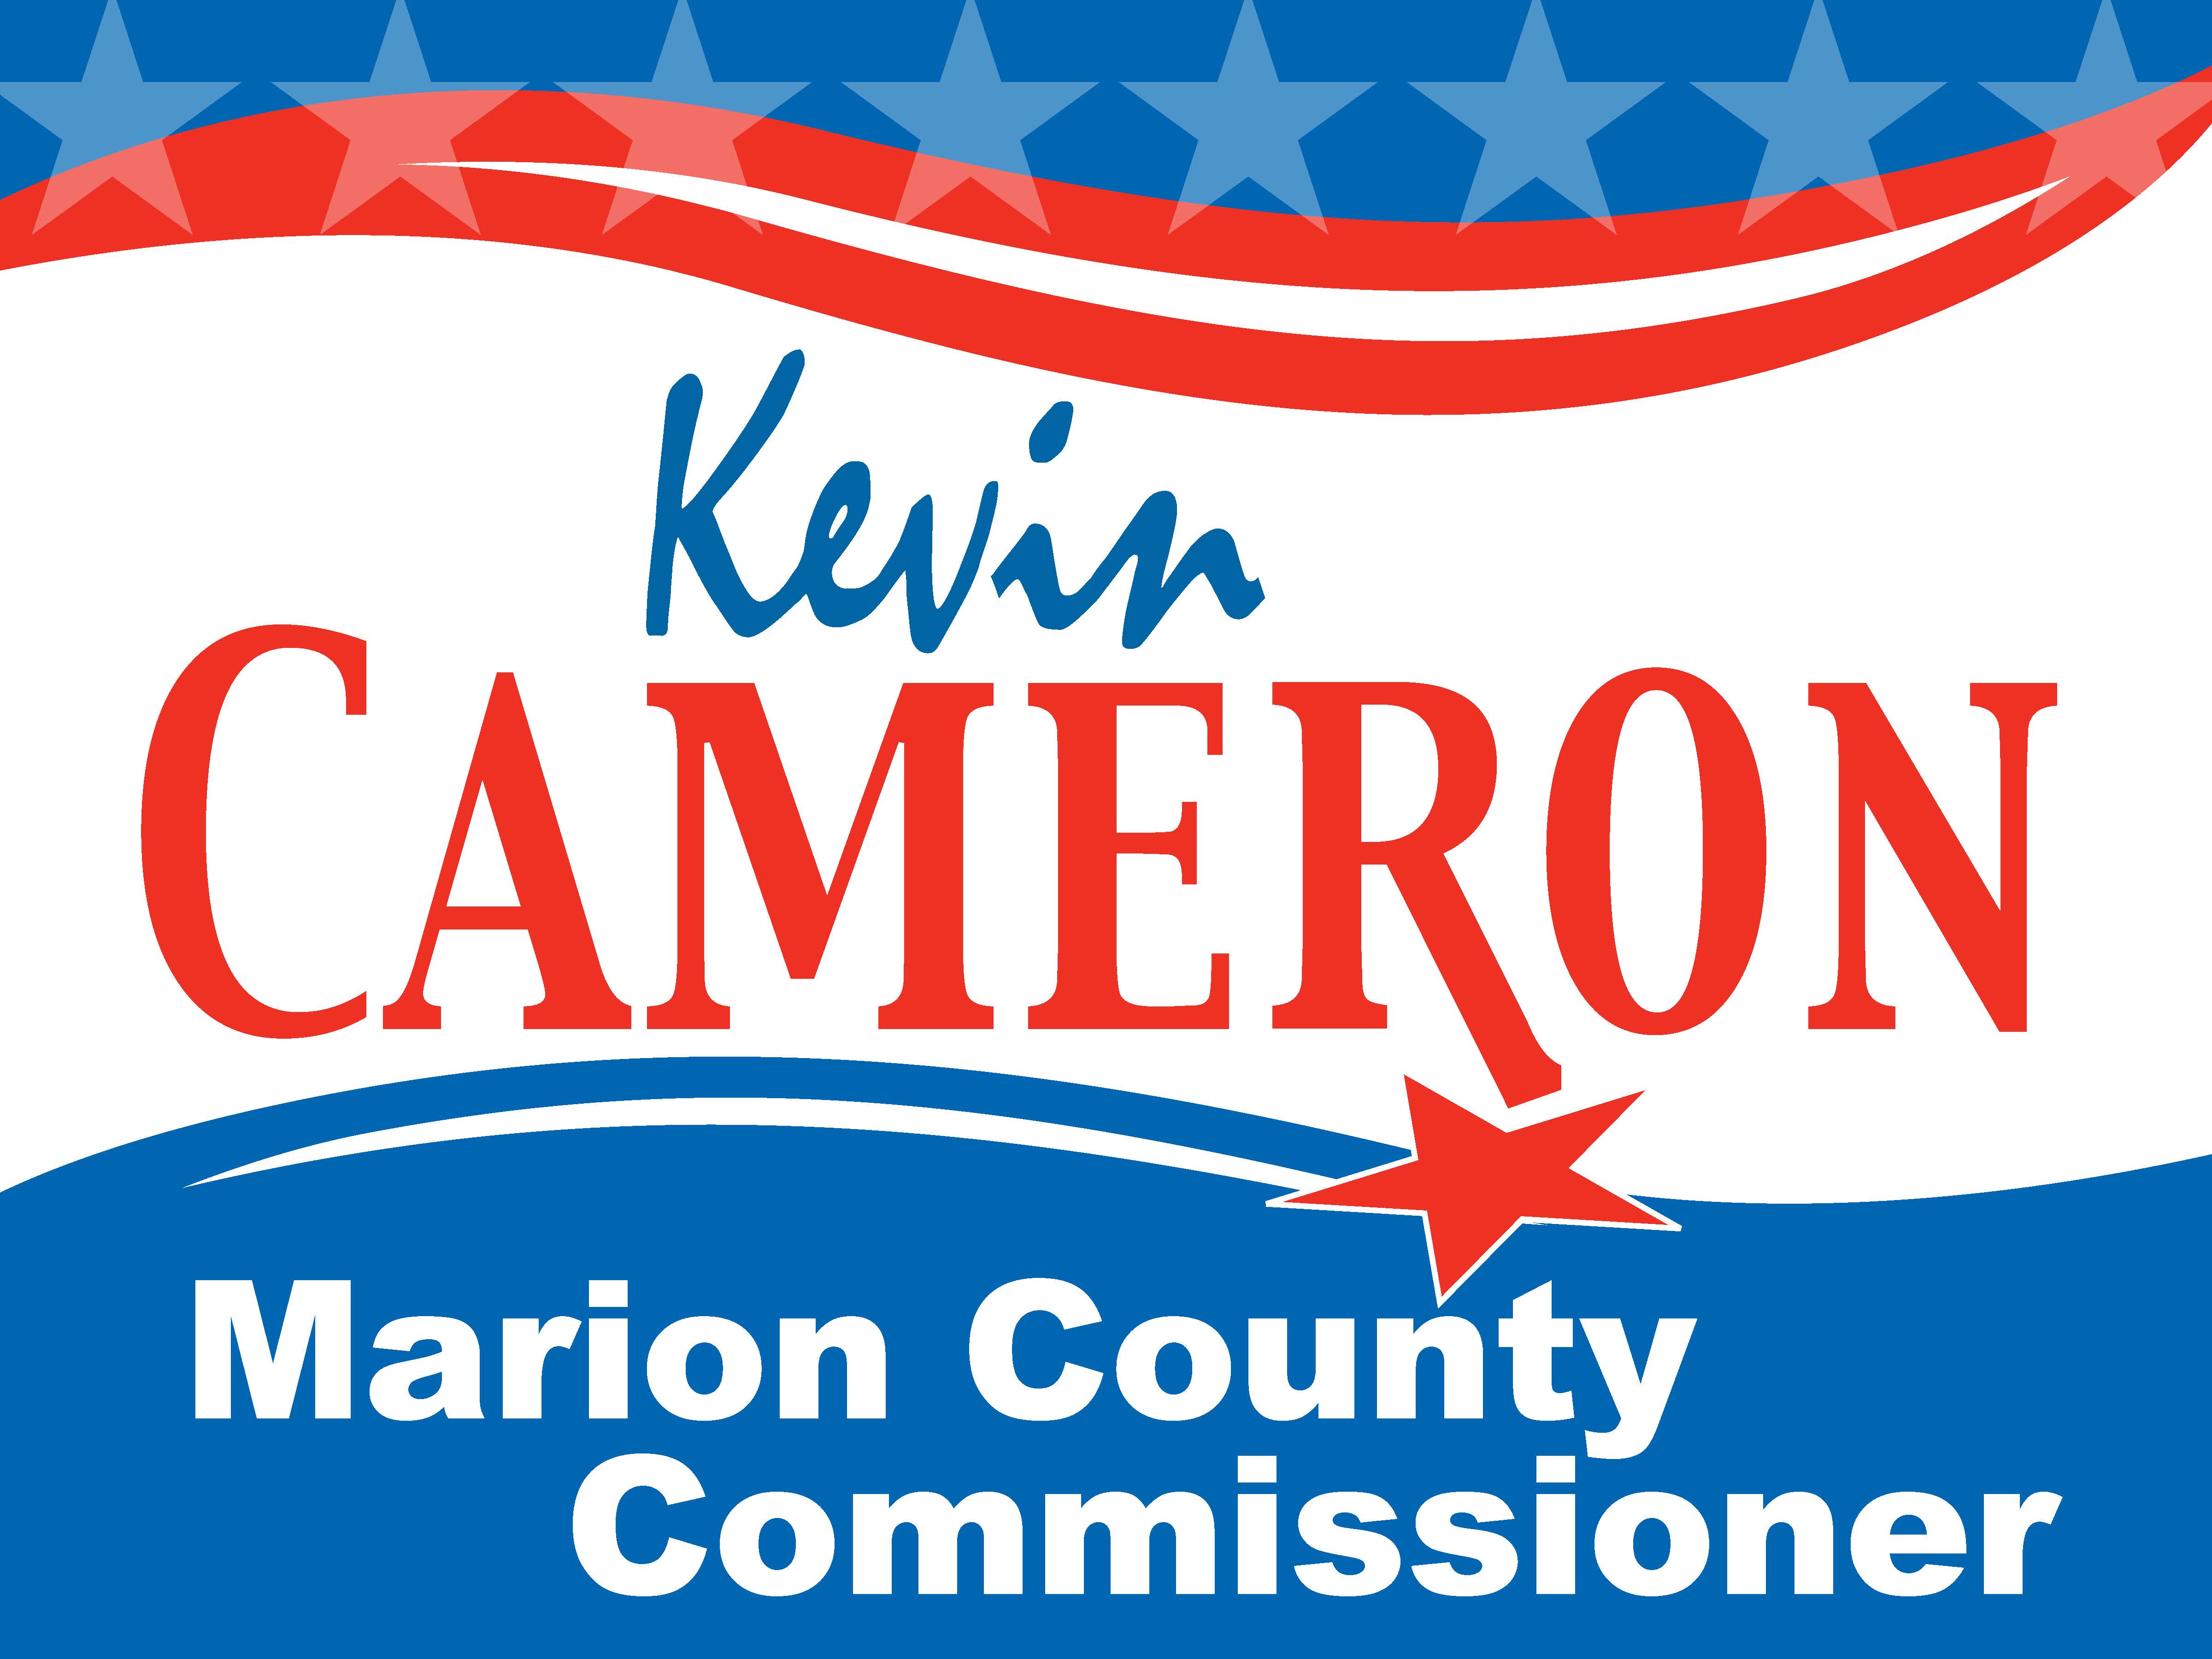 Kevin Cameron Marion County Commissioner logo